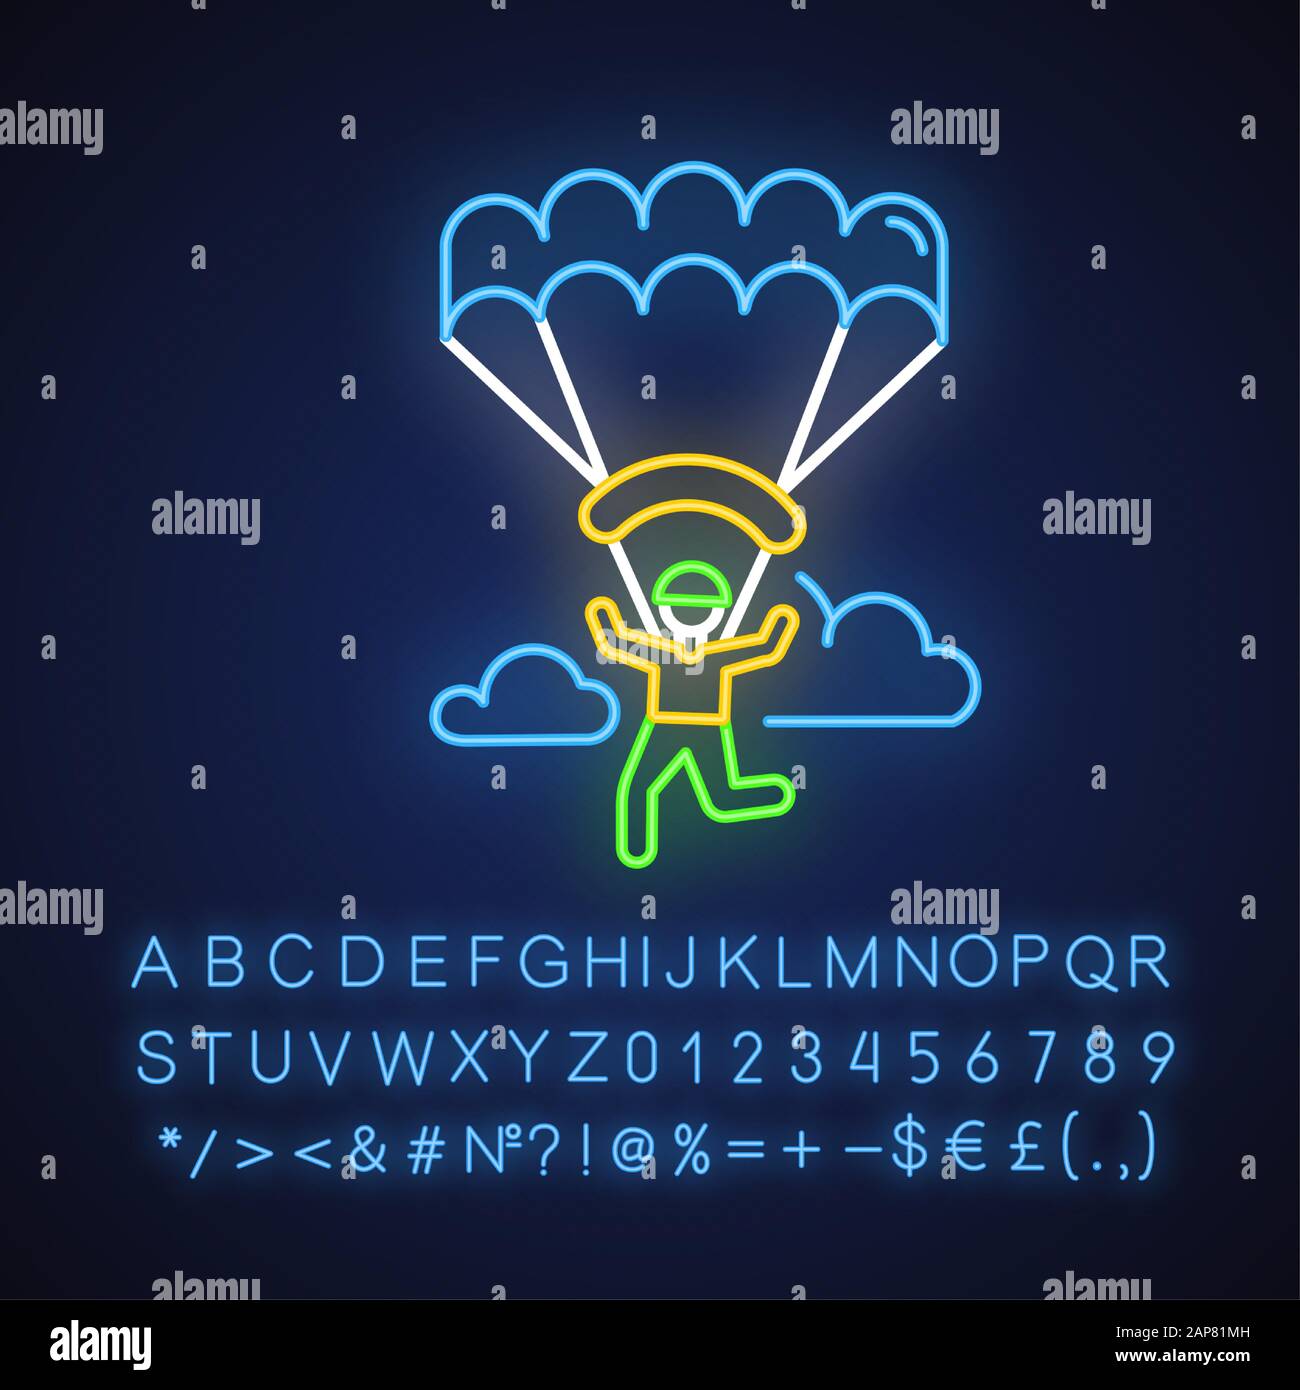 Paragliding neon light icon. Parachuting , paratrooping. Air extreme sport. Skydiving, hang gliding. Flights in sky and jumps with parachute. Glowing Stock Vector